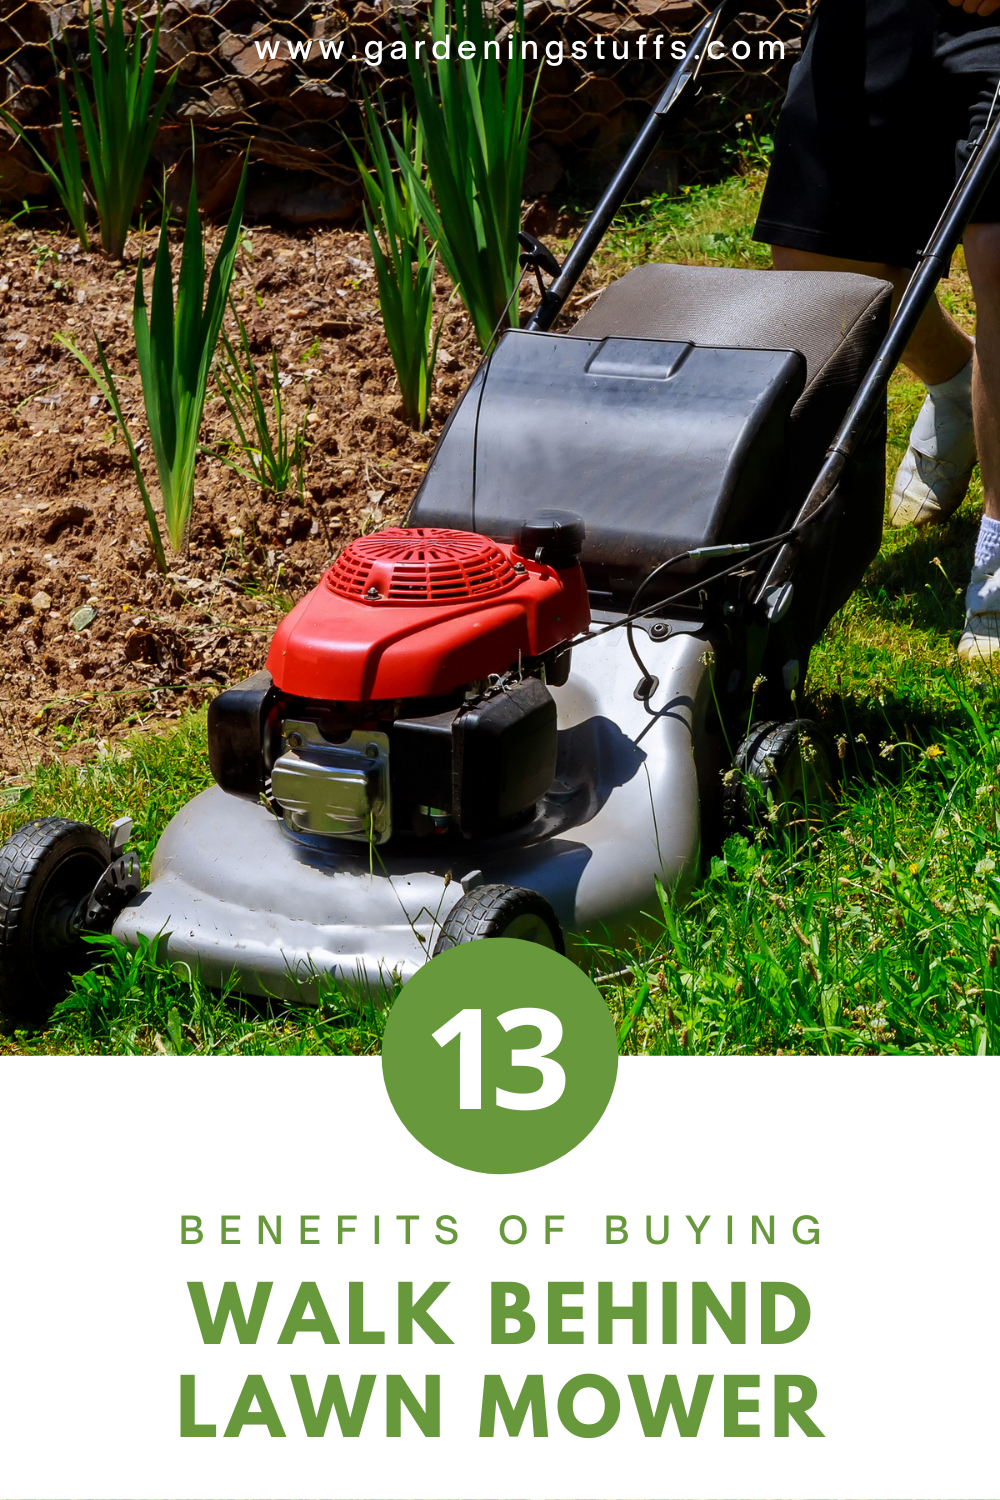 Walk-behind lawn mowers are useful when it comes to large areas of turf. When you know the advantages of buying a walk-behind lawnmower, it will help you finalize your decision in purchasing a new one. Read the benefits of a walk-behind lawn mower in this article and see which advantage may suit your needs. 